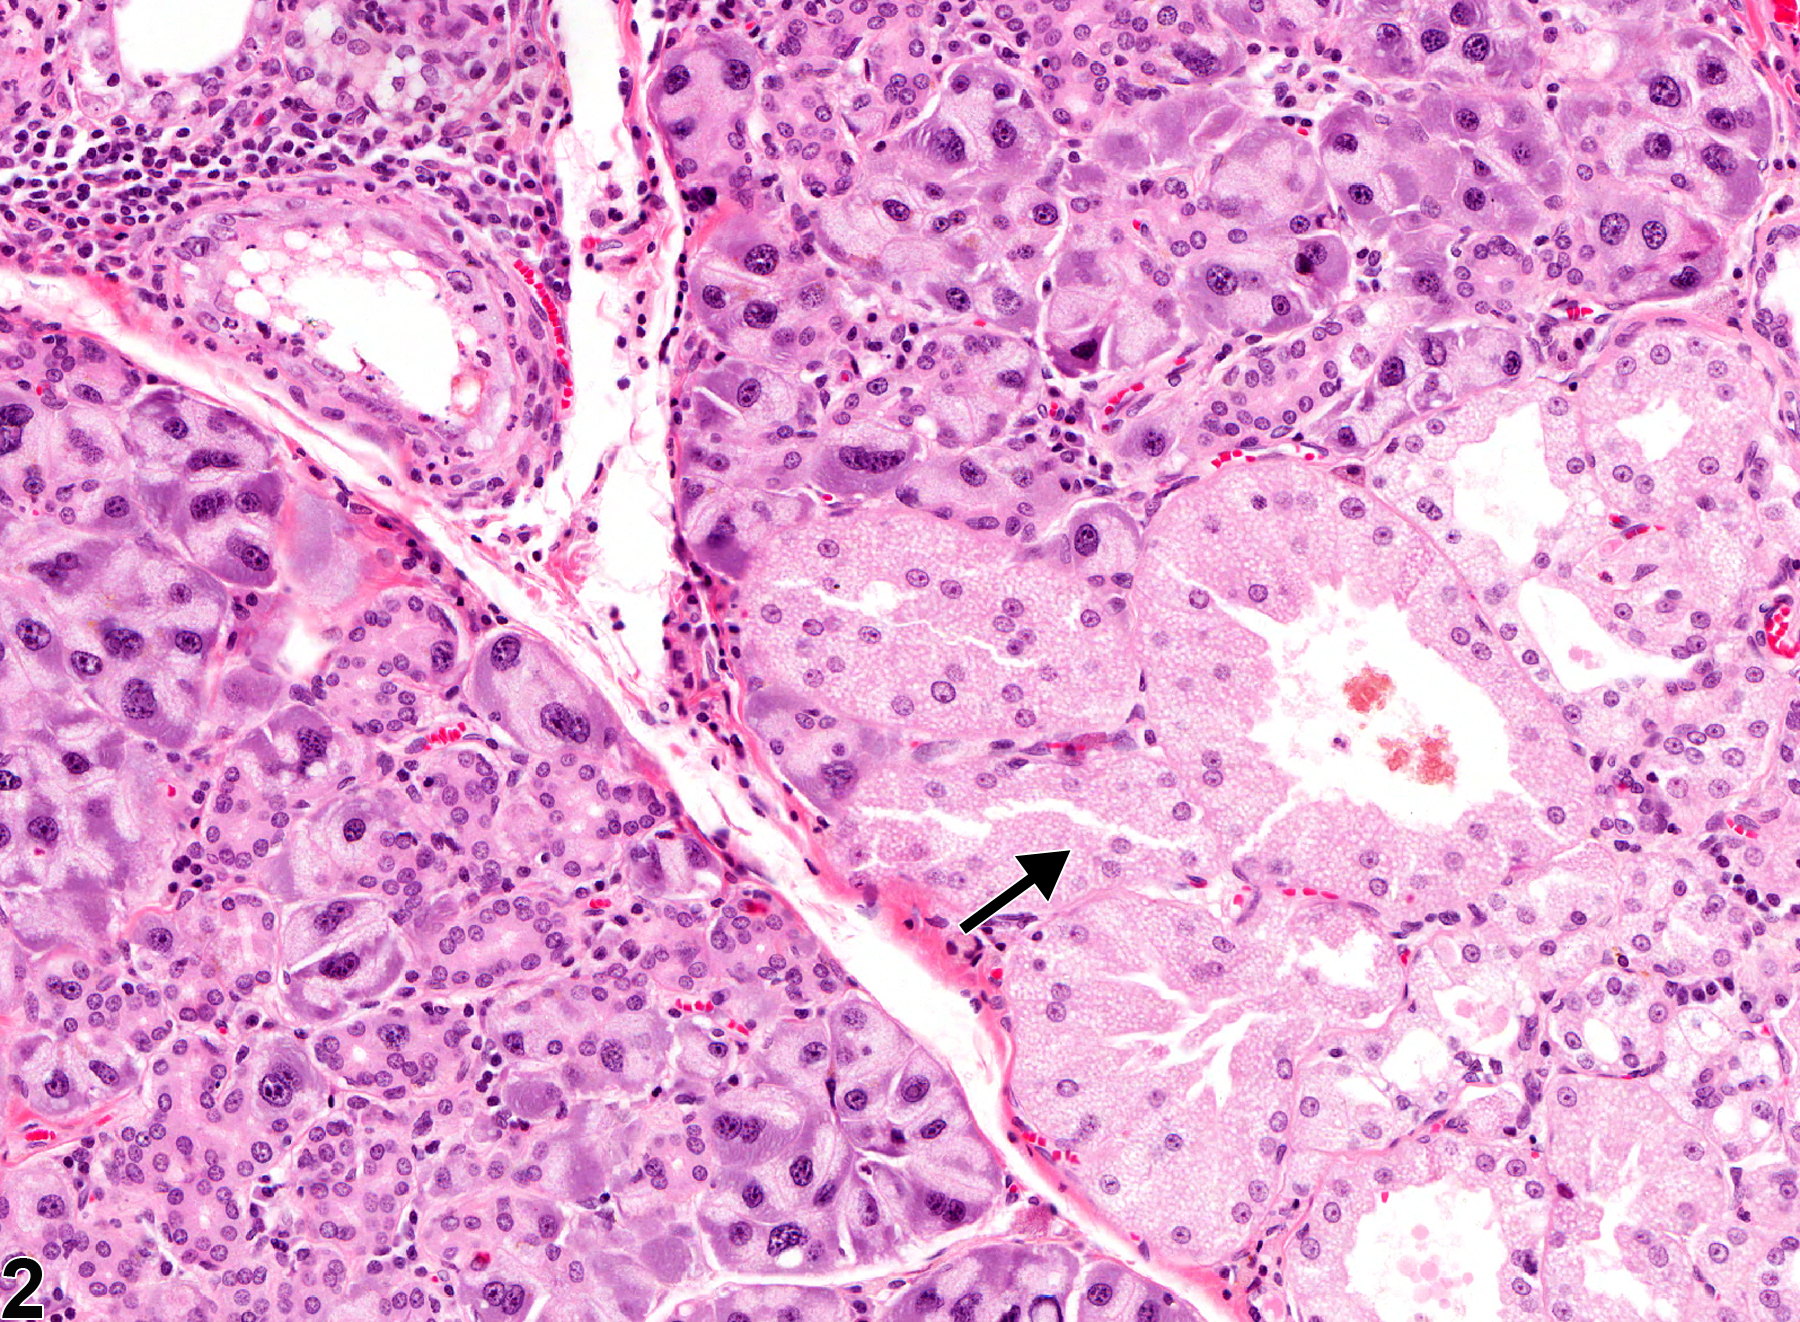 Image of metaplasia, harderian in the lacrimal gland from a male Osborne Mendel rat in a chronic study